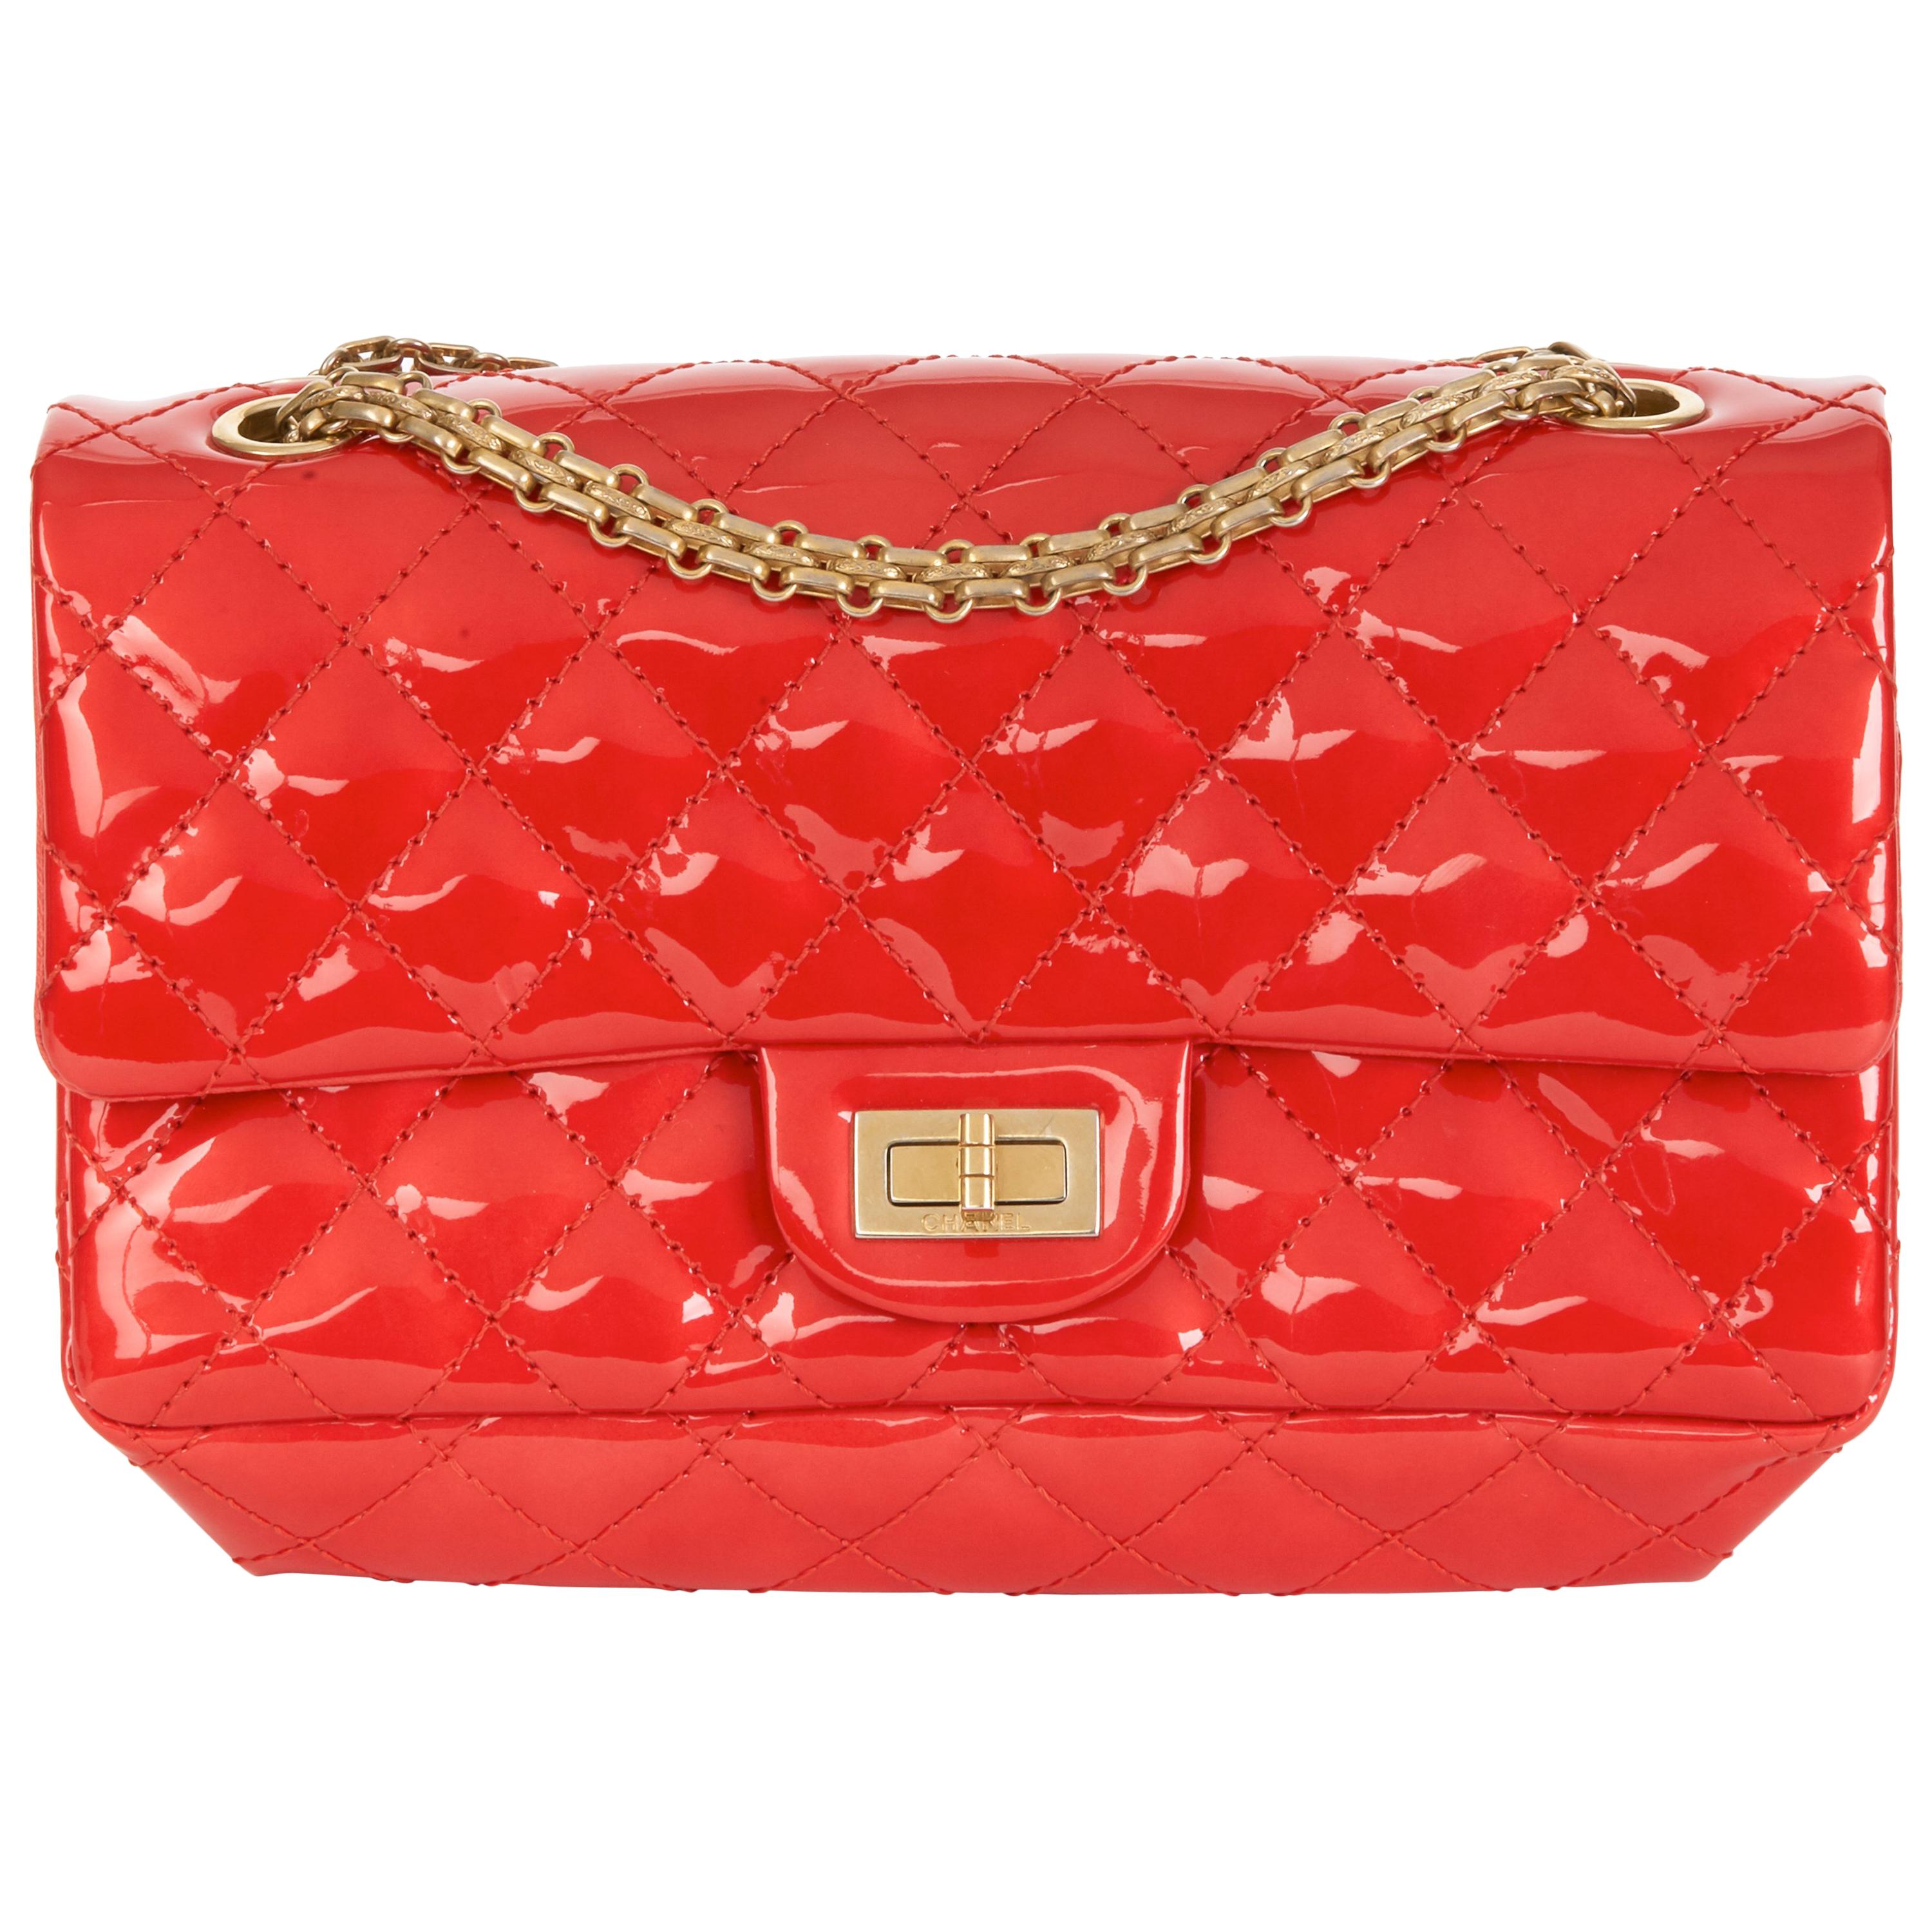 2008 Chanel Red Quilted Patent Leather 2.55 Reissue 225 Accordion Flap Bag